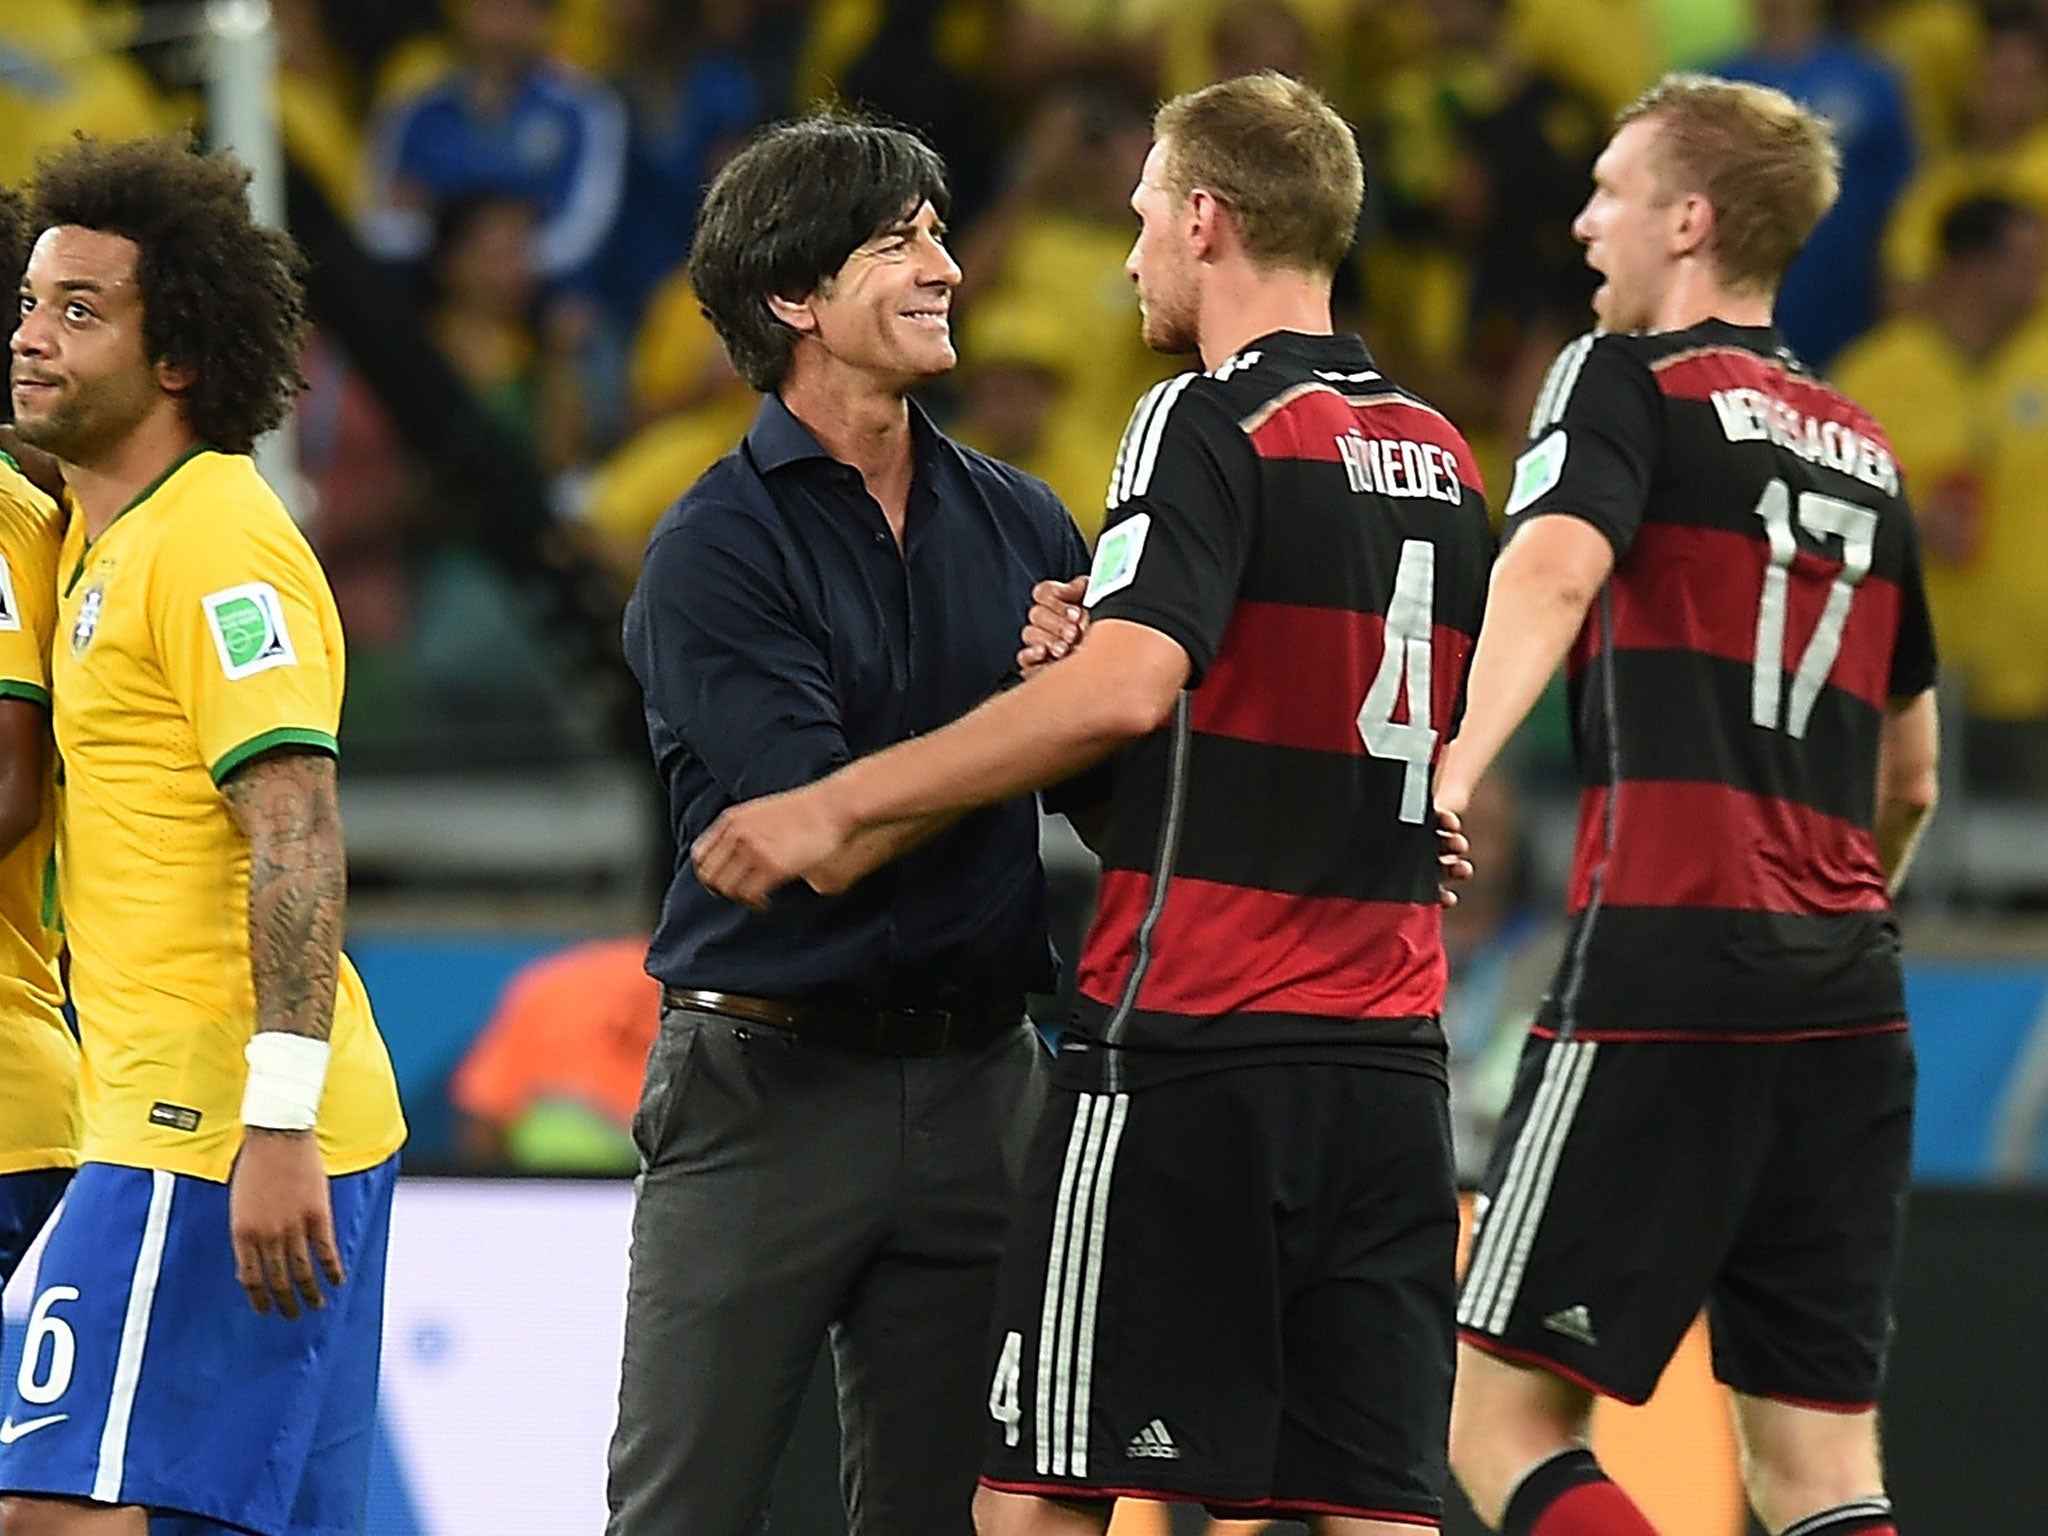 Joachim Low will have relished watching how the Dutch were able to stop Argentina's attack